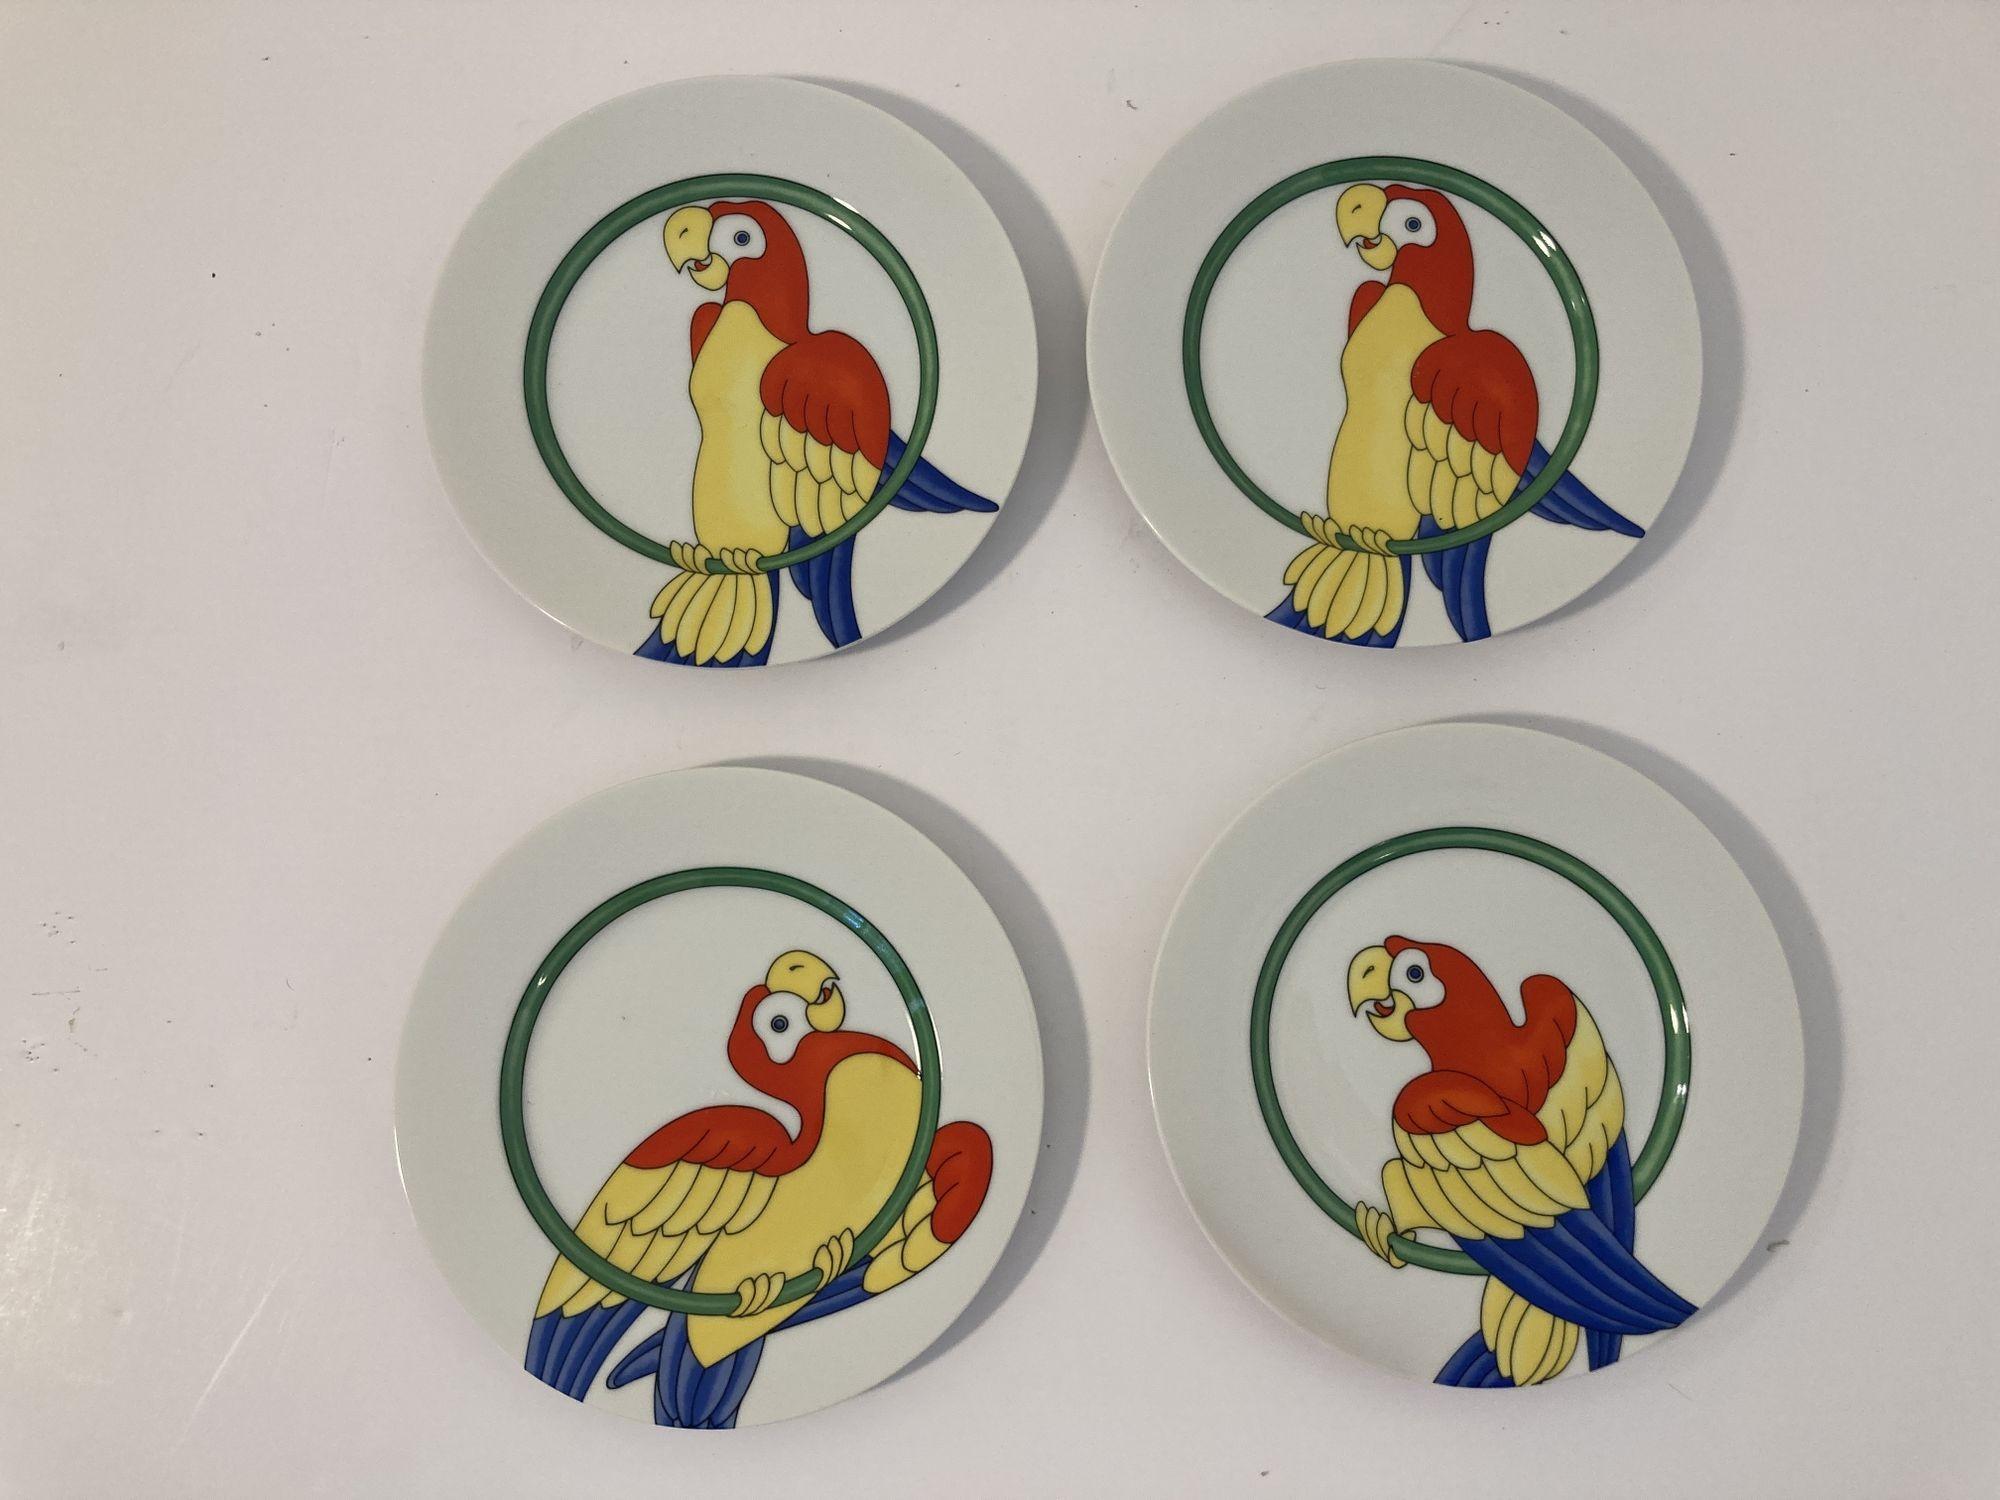 Vintage Parrots Decorative Plates by Fitz and Floyd Set of 4 For Sale 1